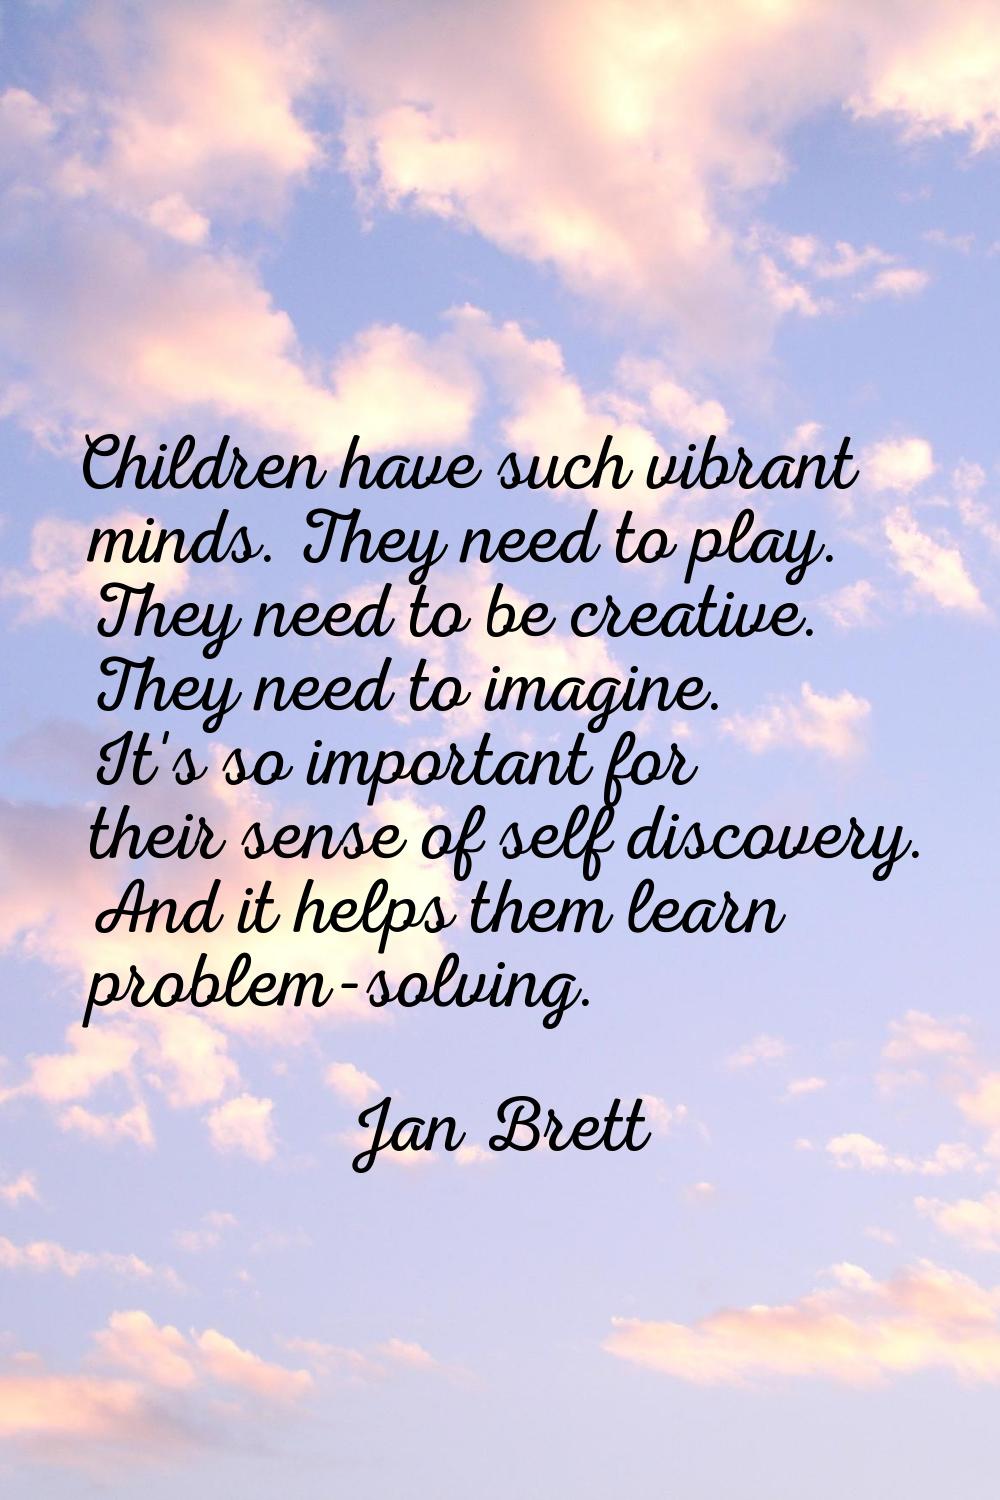 Children have such vibrant minds. They need to play. They need to be creative. They need to imagine